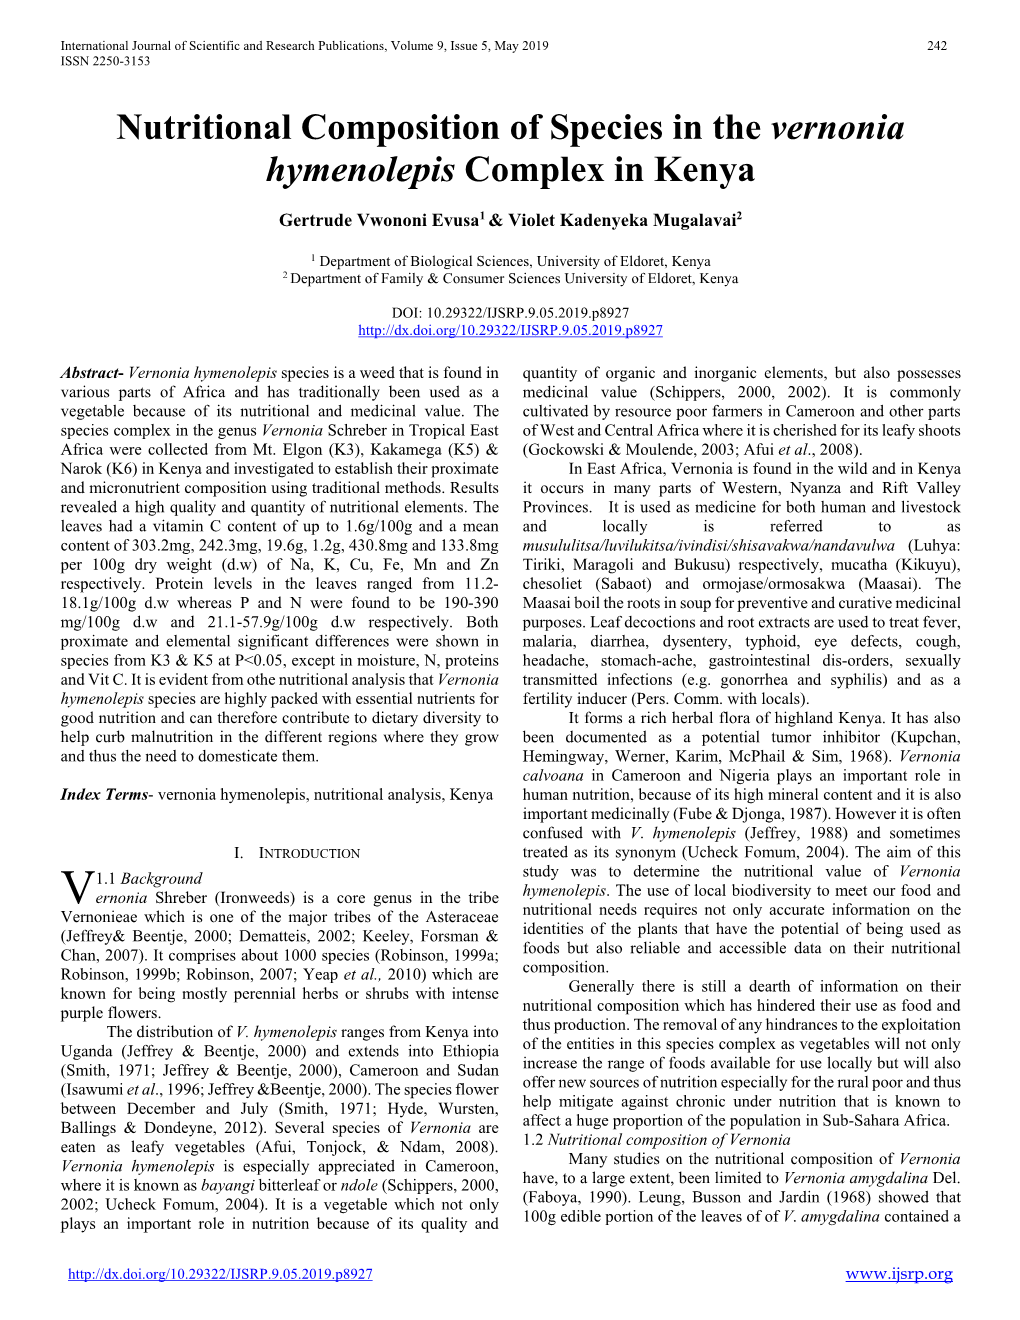 Nutritional Composition of Species in the Vernonia Hymenolepis Complex in Kenya